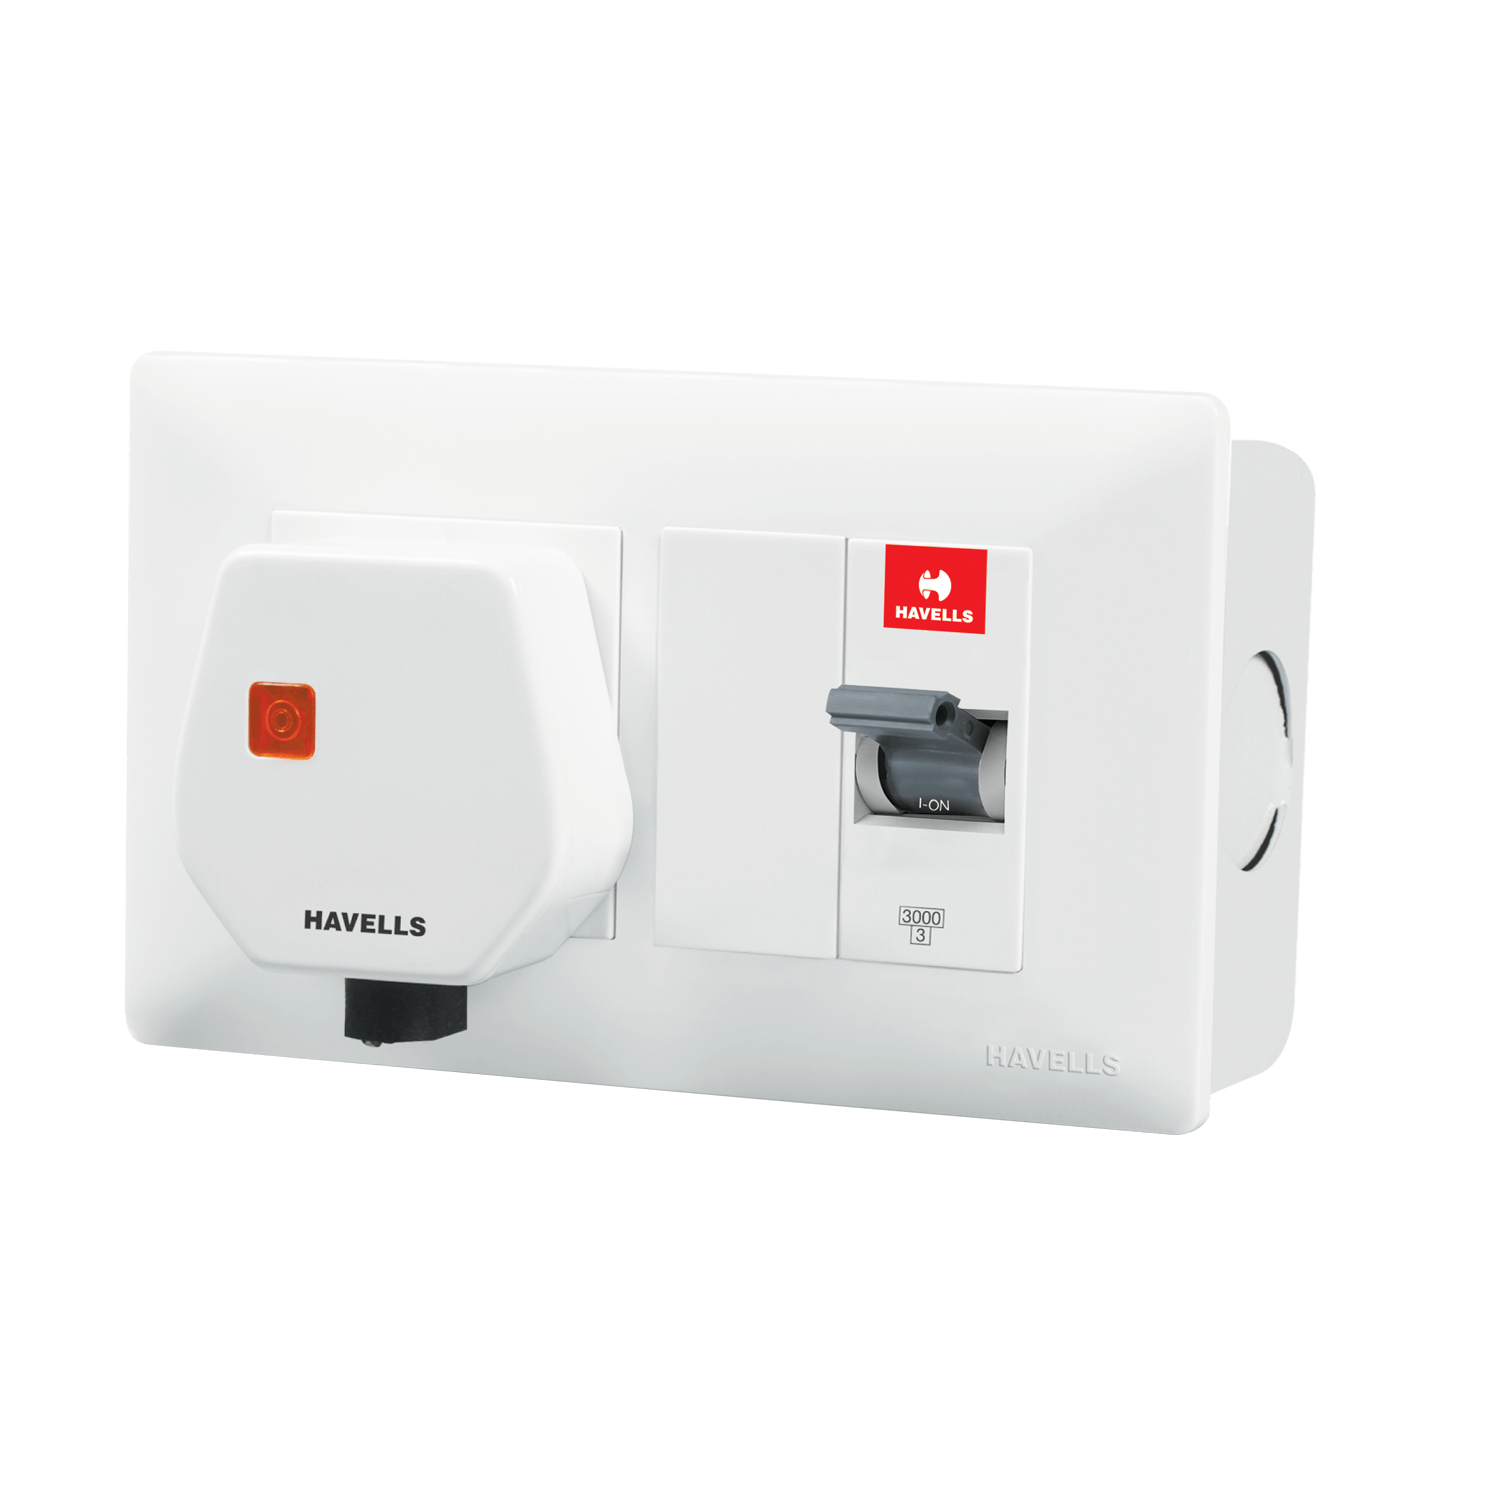 Havells MCB DBOXX Protected Socket Combo with Steel Sheet Enclosure (Pack of 5)